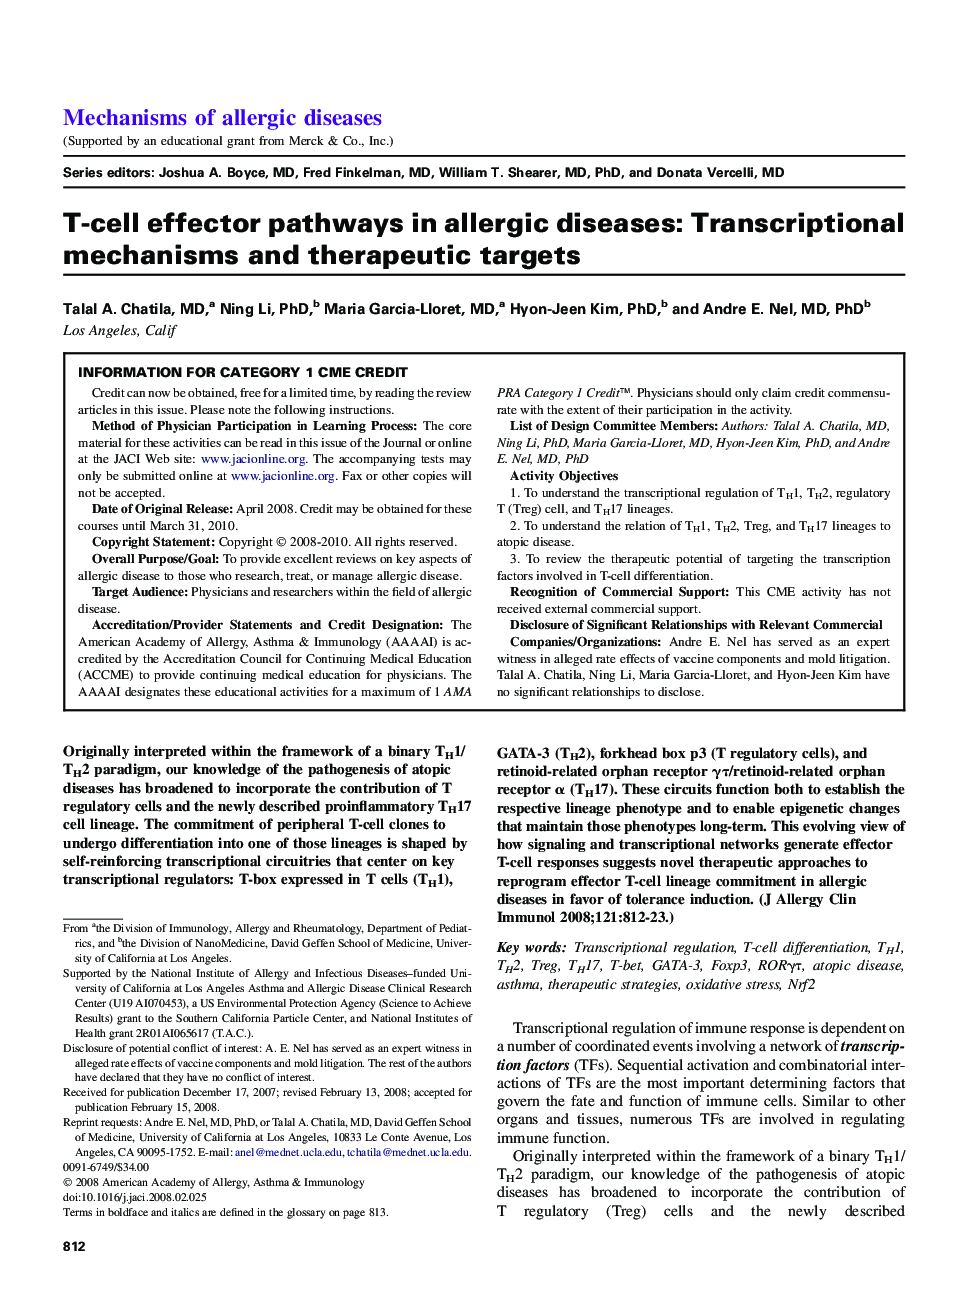 T-cell effector pathways in allergic diseases: Transcriptional mechanisms and therapeutic targets 